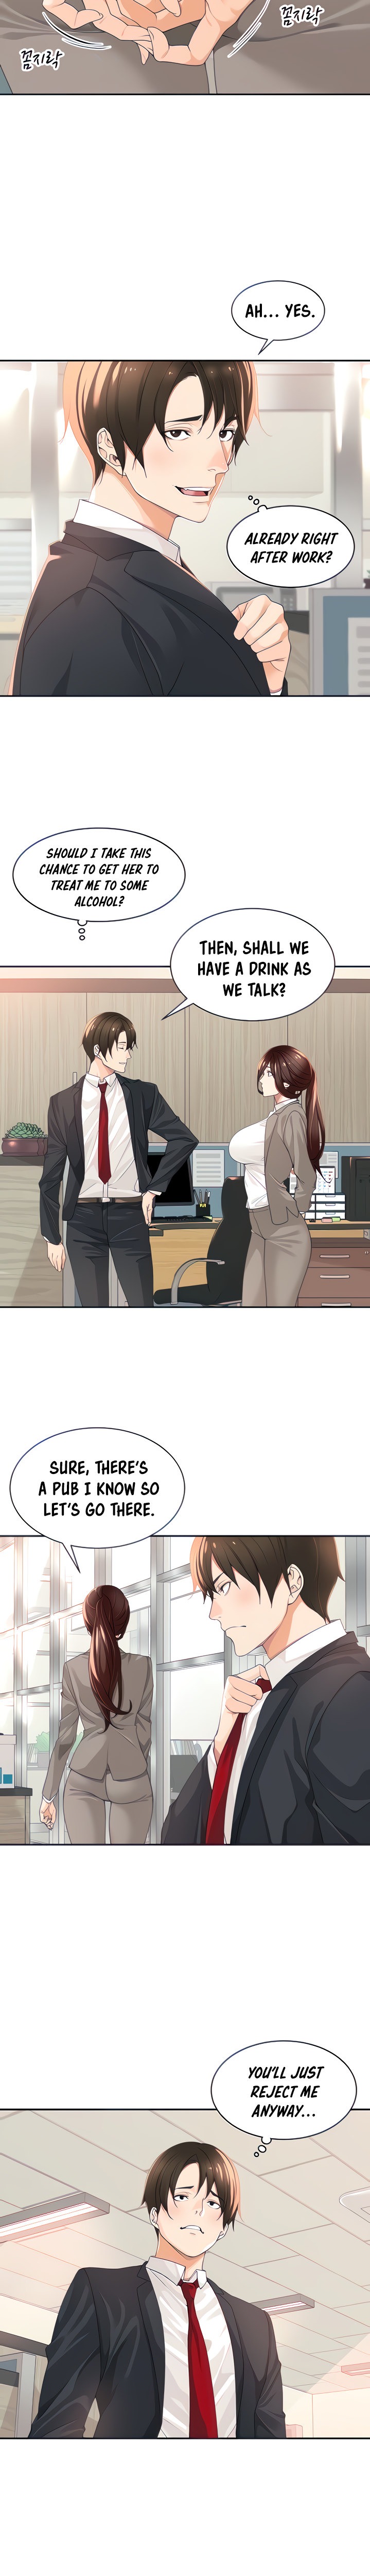 Manager, Please Scold Me - Chapter 2 Page 2